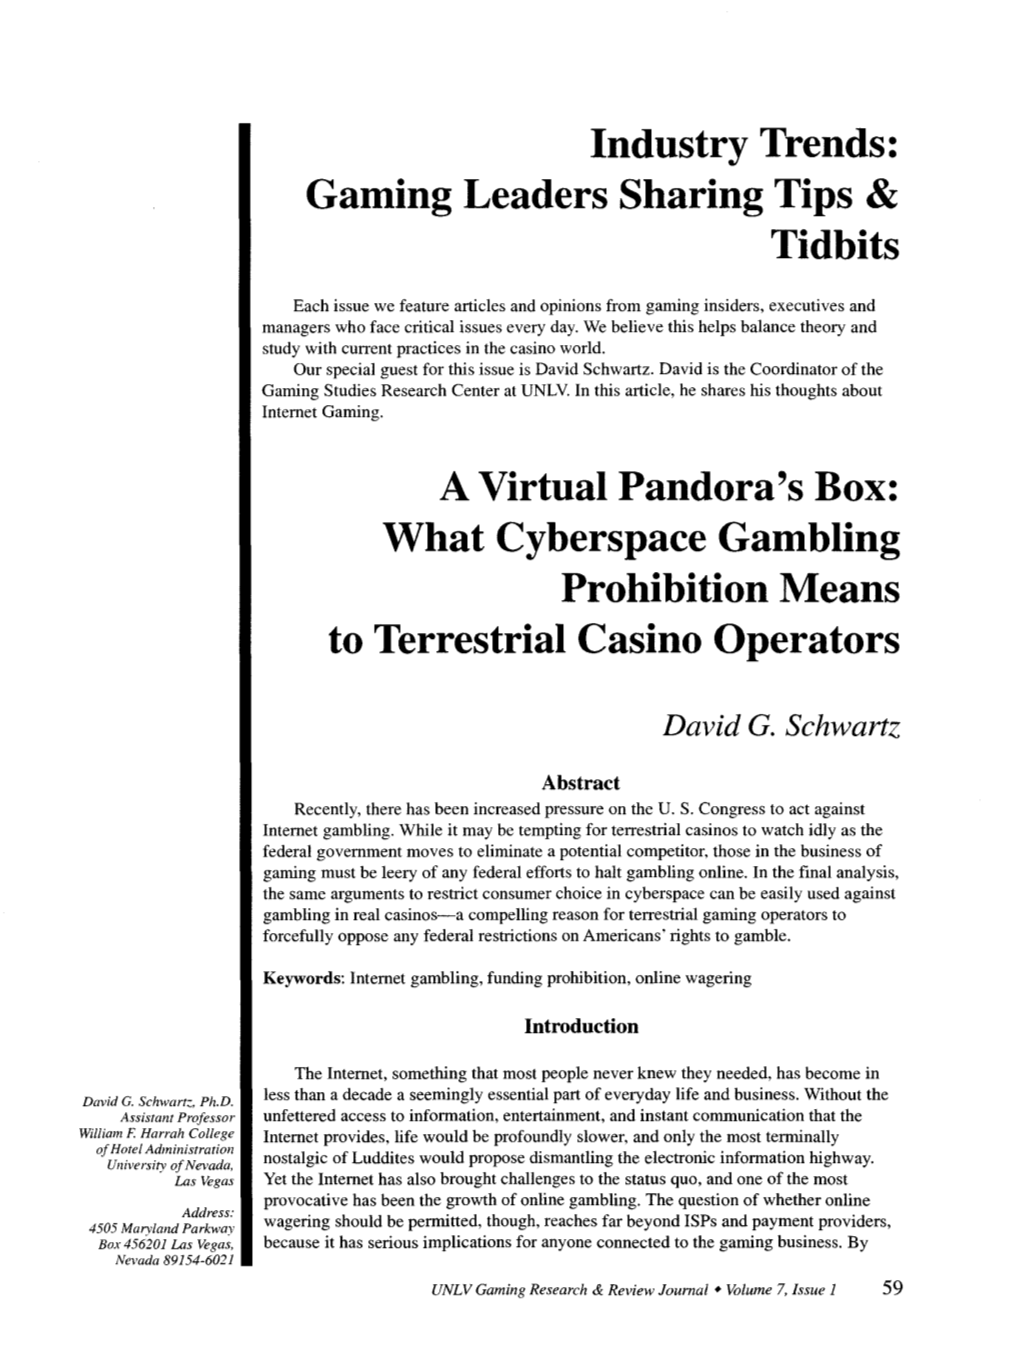 What Cyberspace Gambling Prohibition Means to Terrestrial Casino Operators